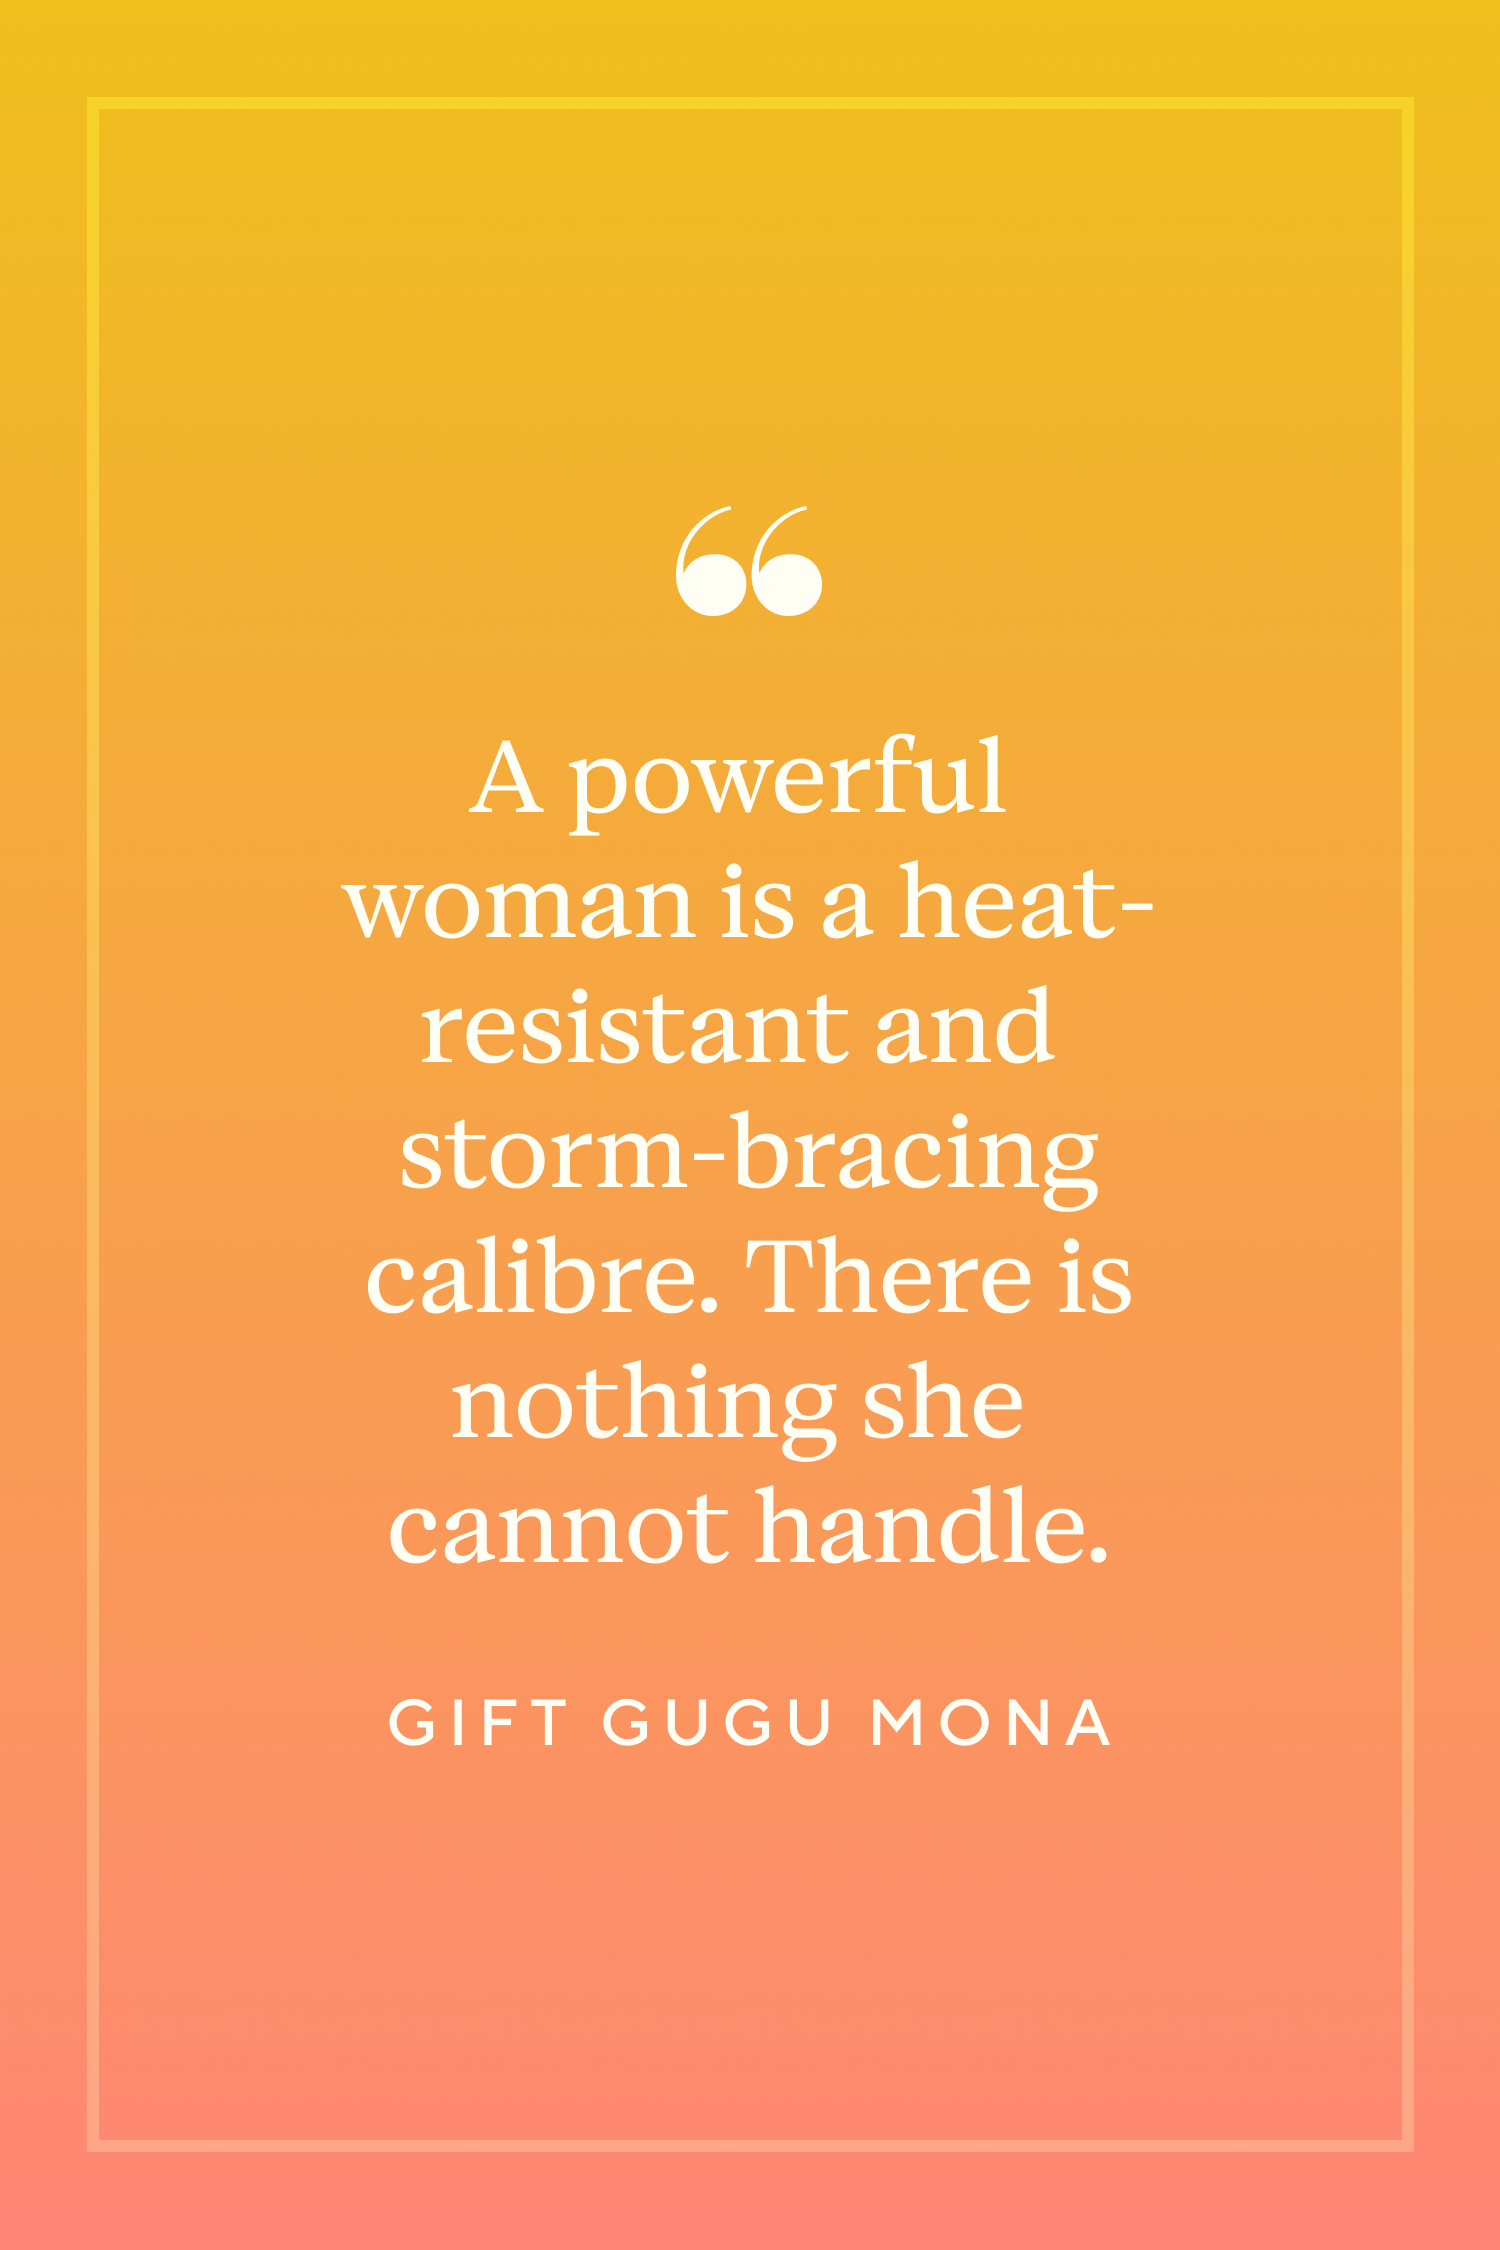 88 Quotes To Empower, Inspire, and Uplift Women